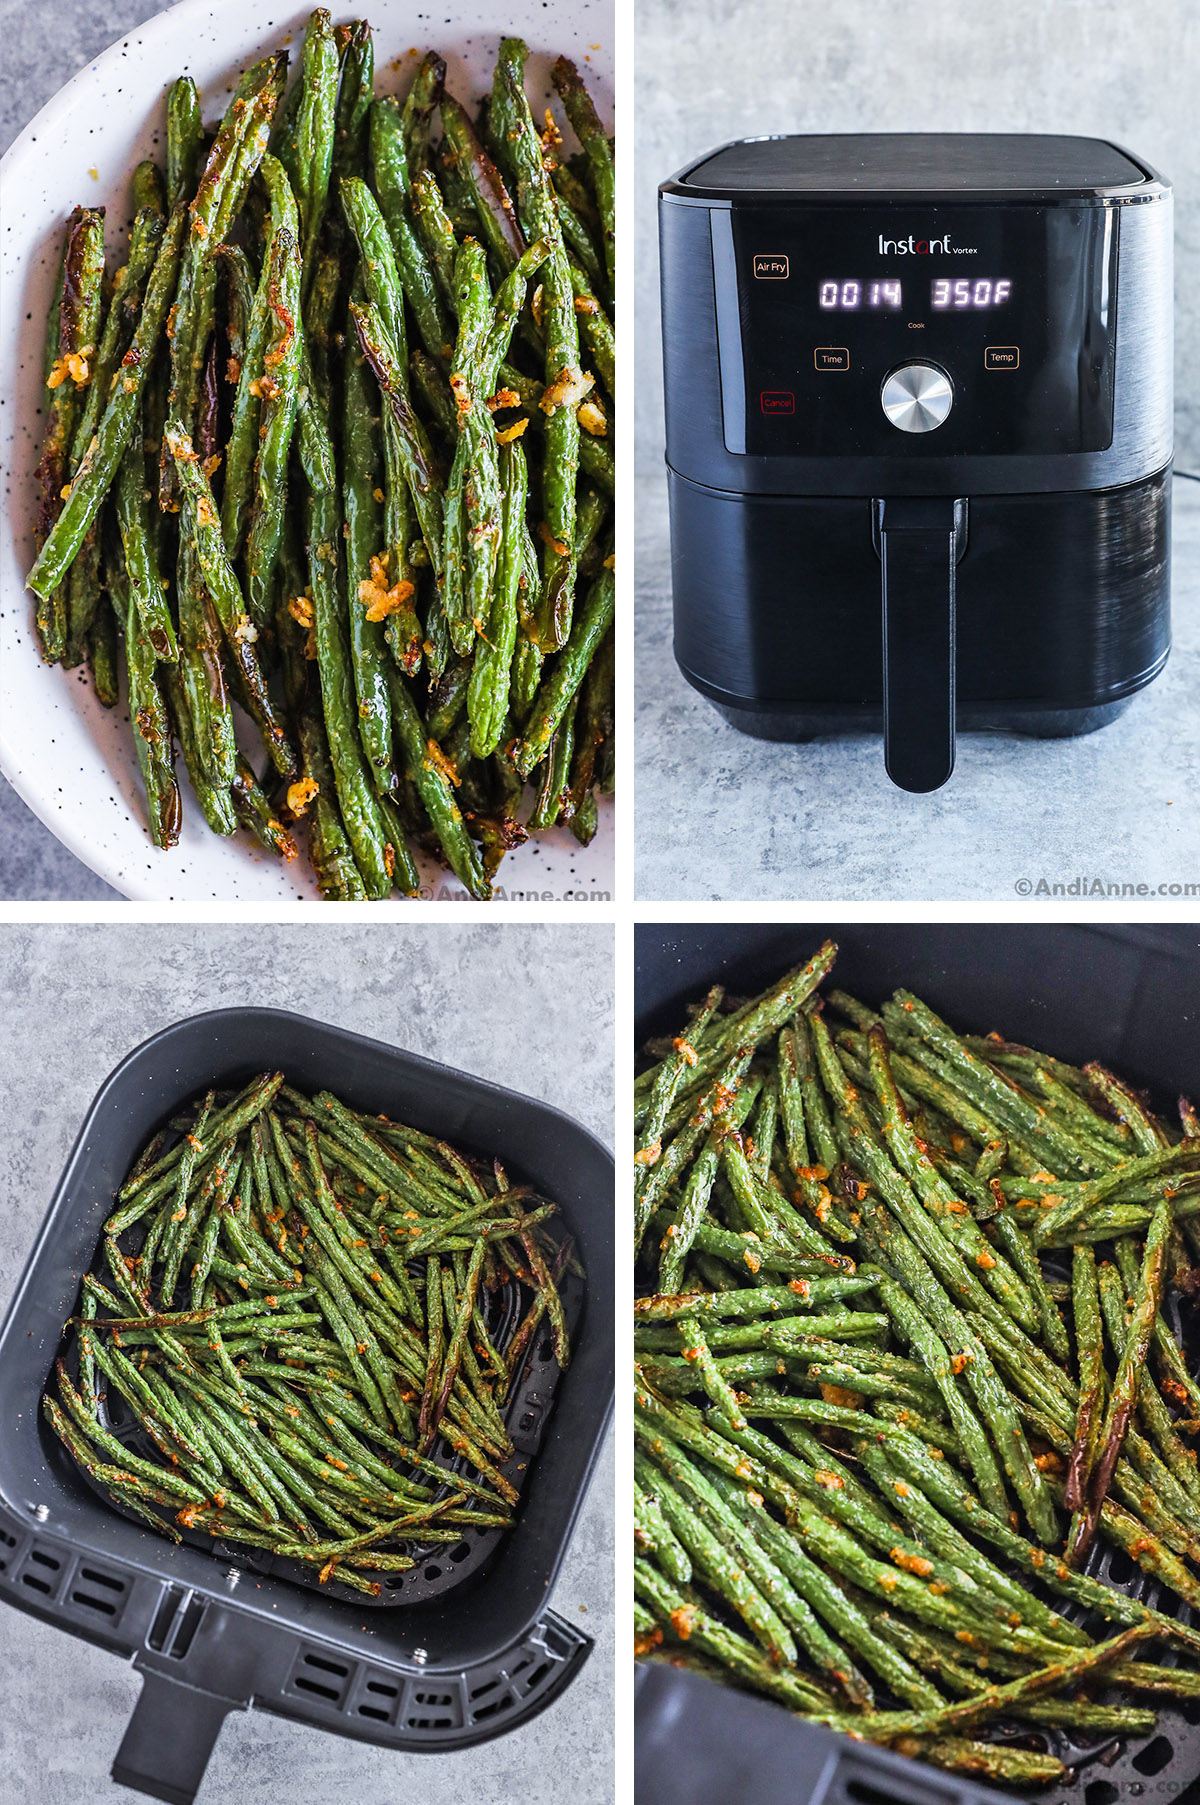 Bowl of cooked green beans, an air fryer, and an air fryer basket with cooked green beans and crispy parmesan pieces.